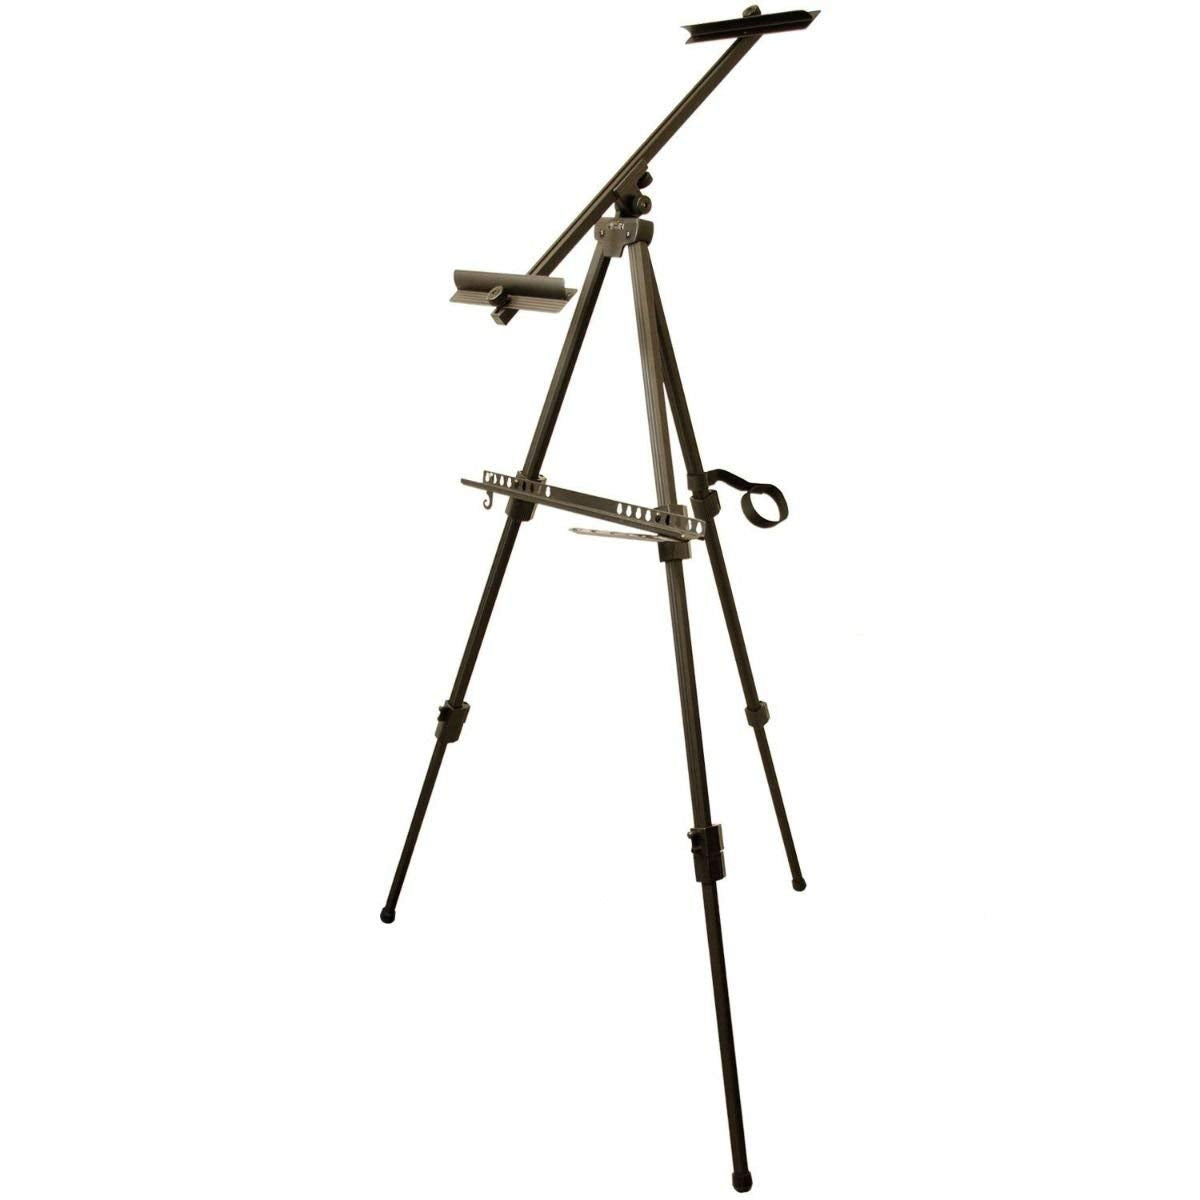 Brustro Artist's Bristol Watercolour Folding Metal Painting Easel, Holds Canvases Upto 68.8"